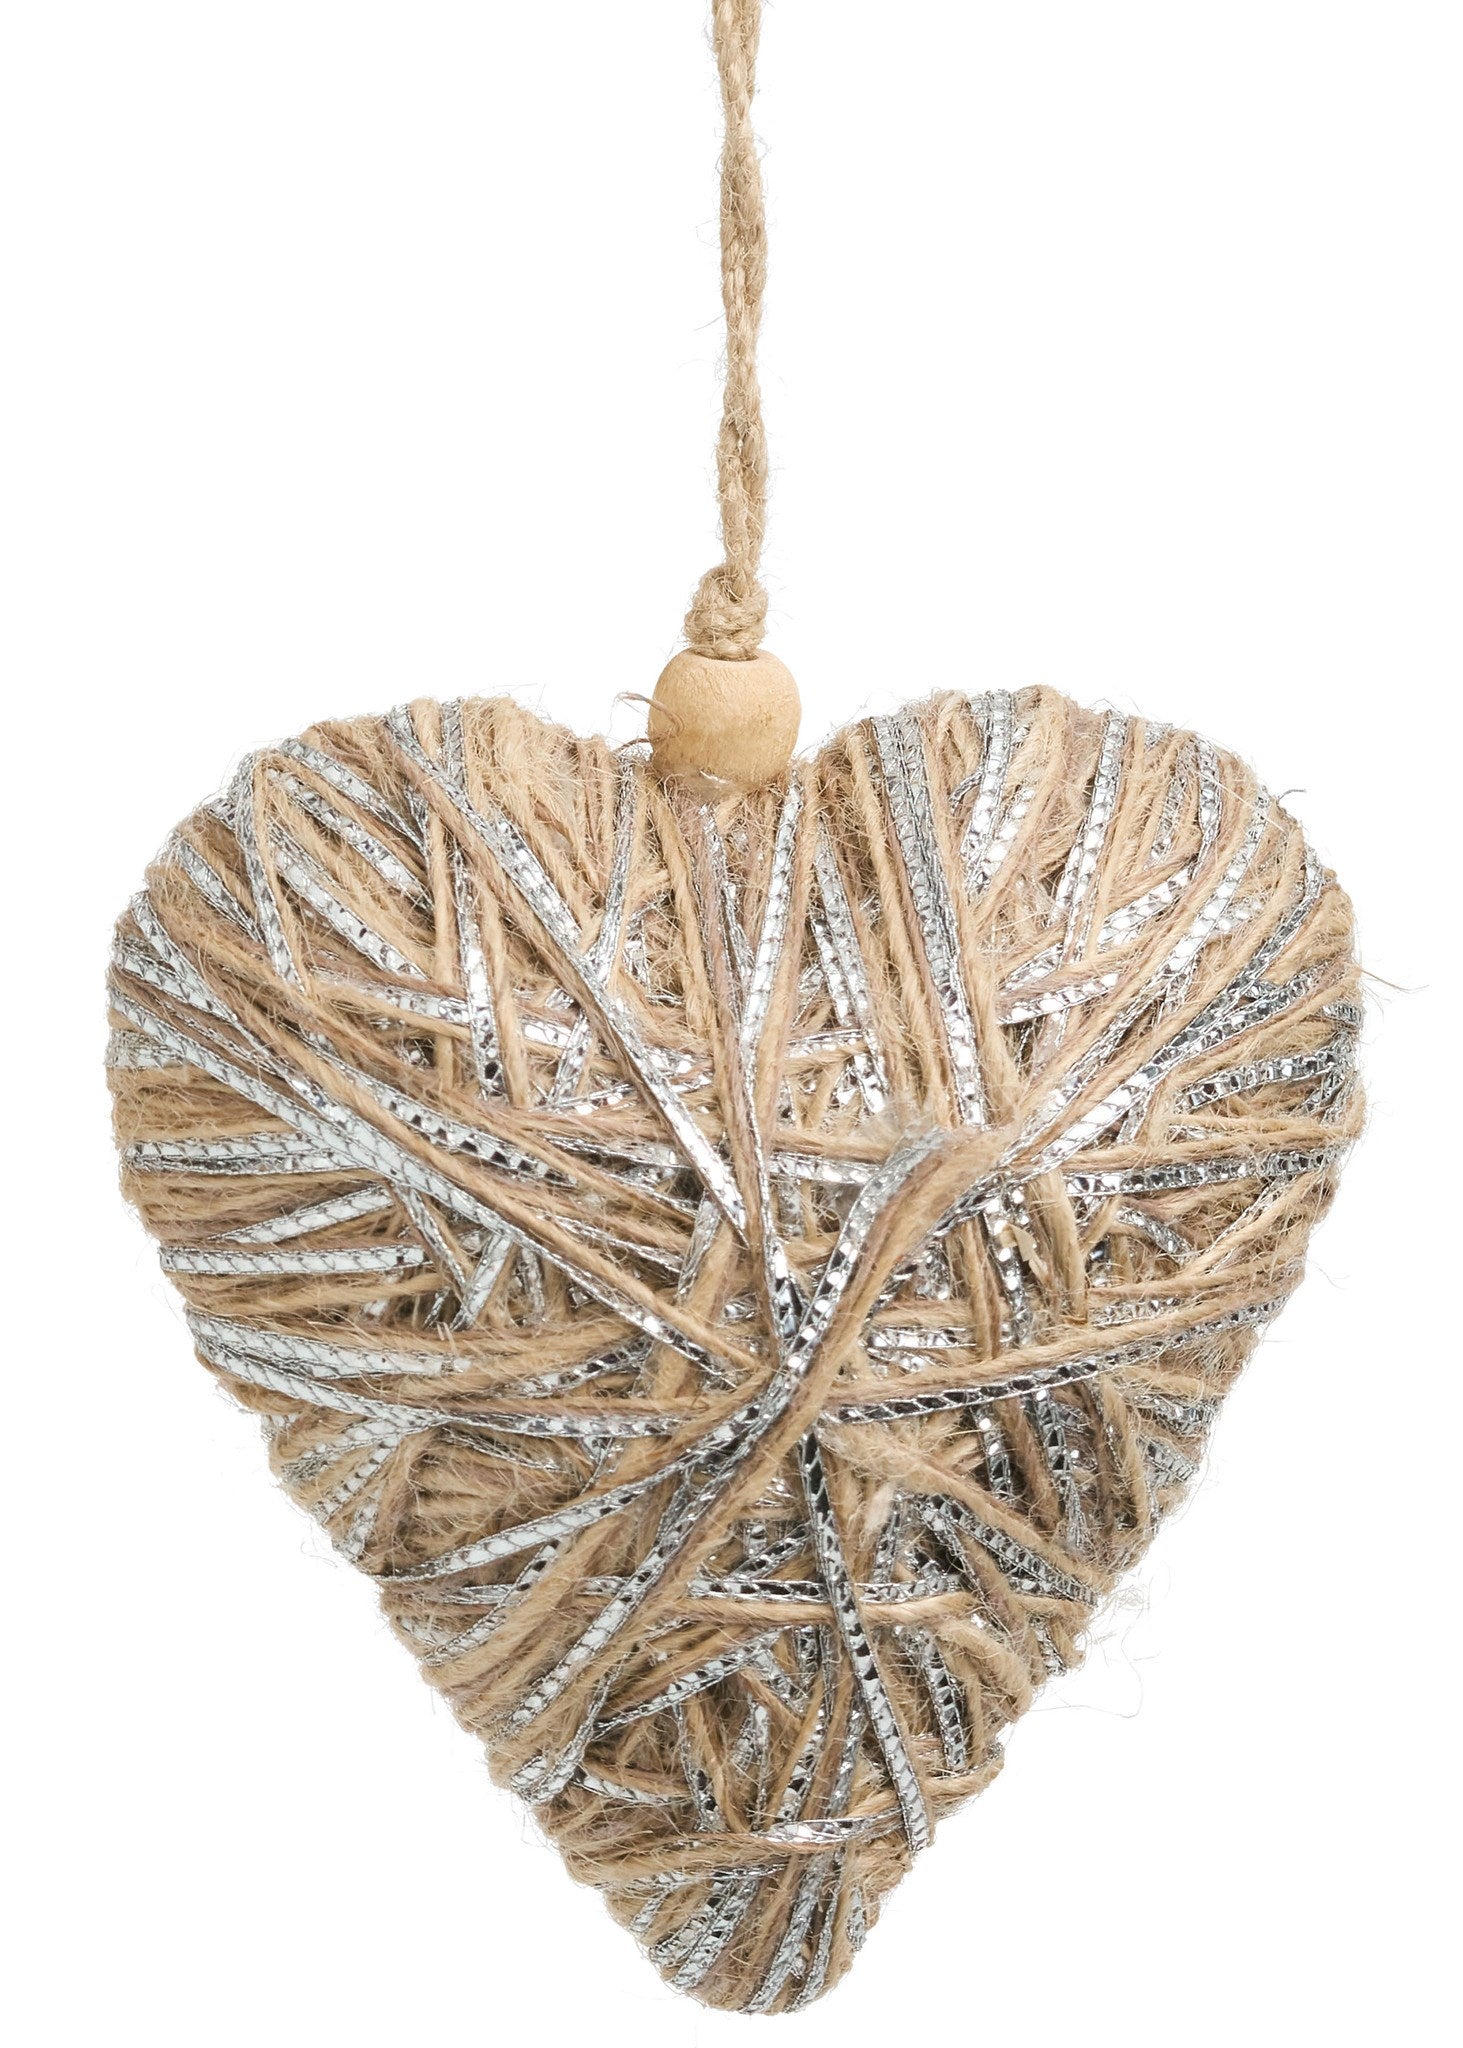 Jute and Gold Thread Heart Ornament